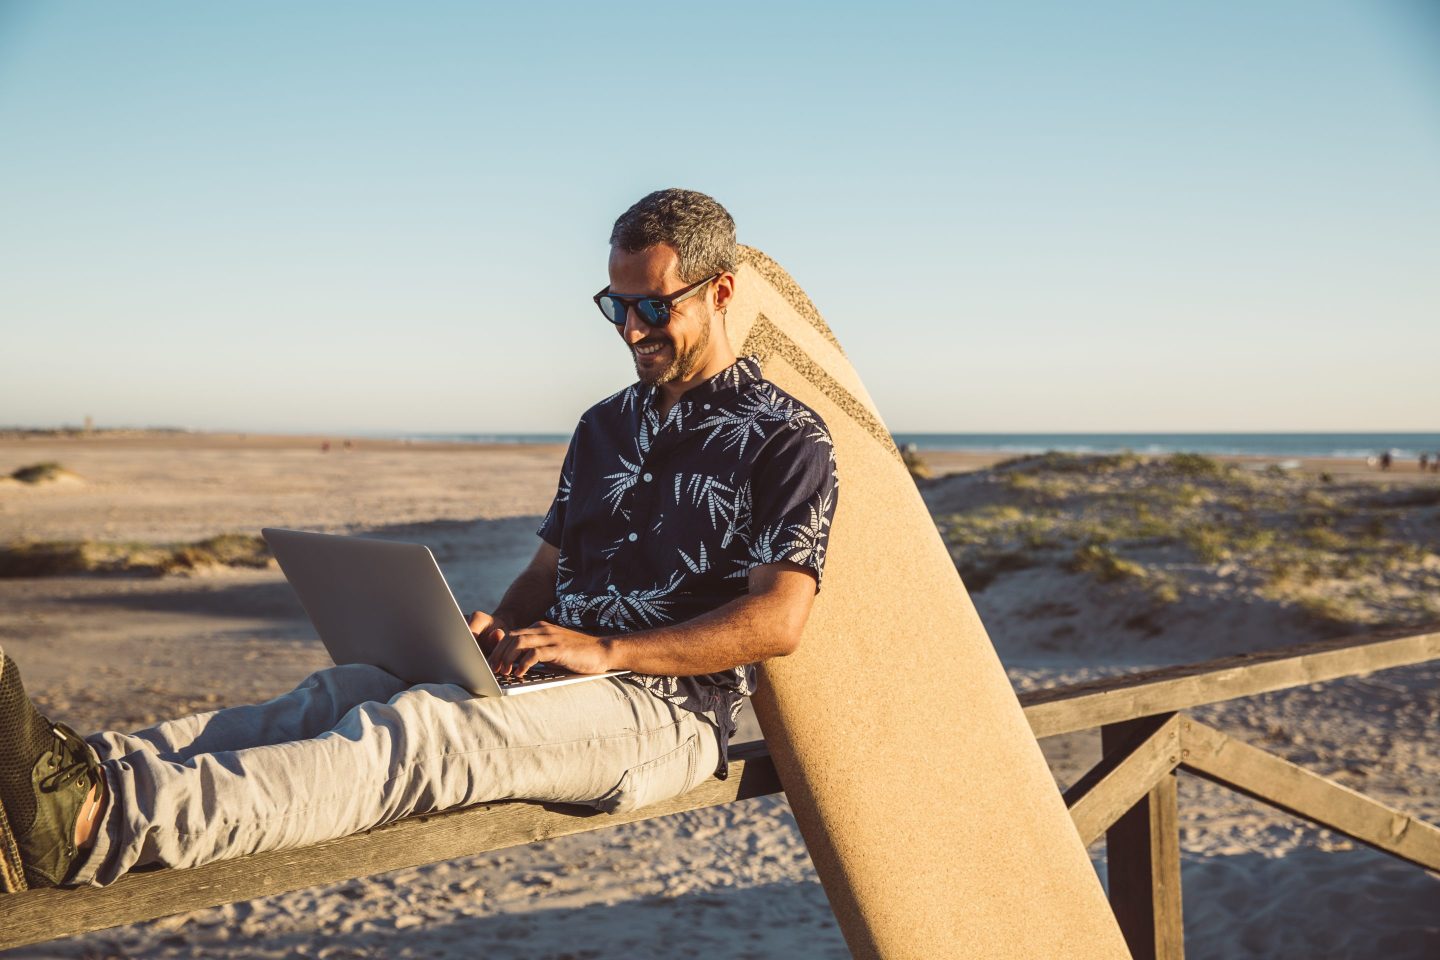 Man sitting at the beach, using laptop, with surfboard leaning on fence